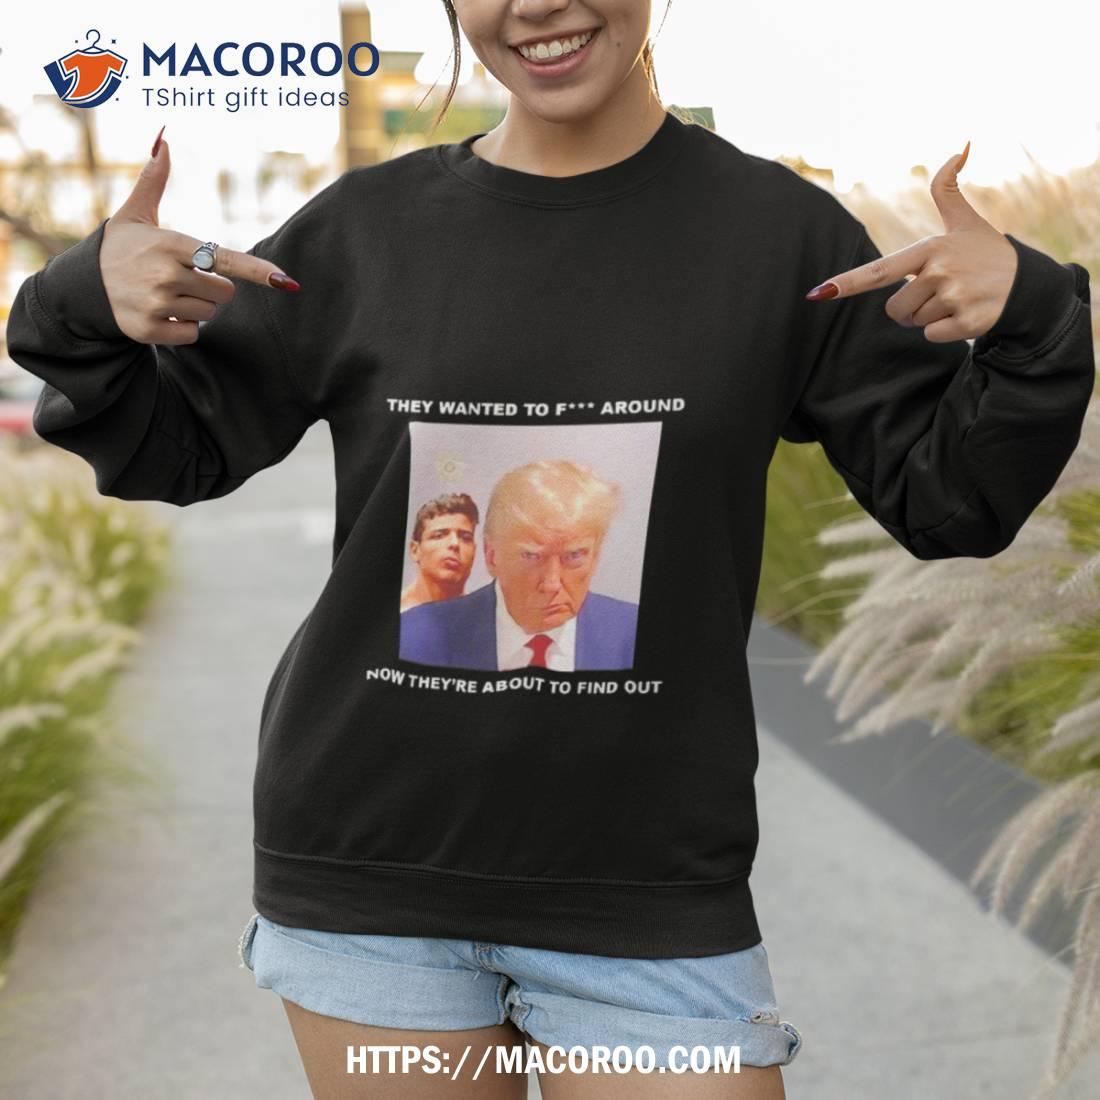 Trump They Wanted To Fuck Around New They Re About To Find Oushirt Sweatshirt